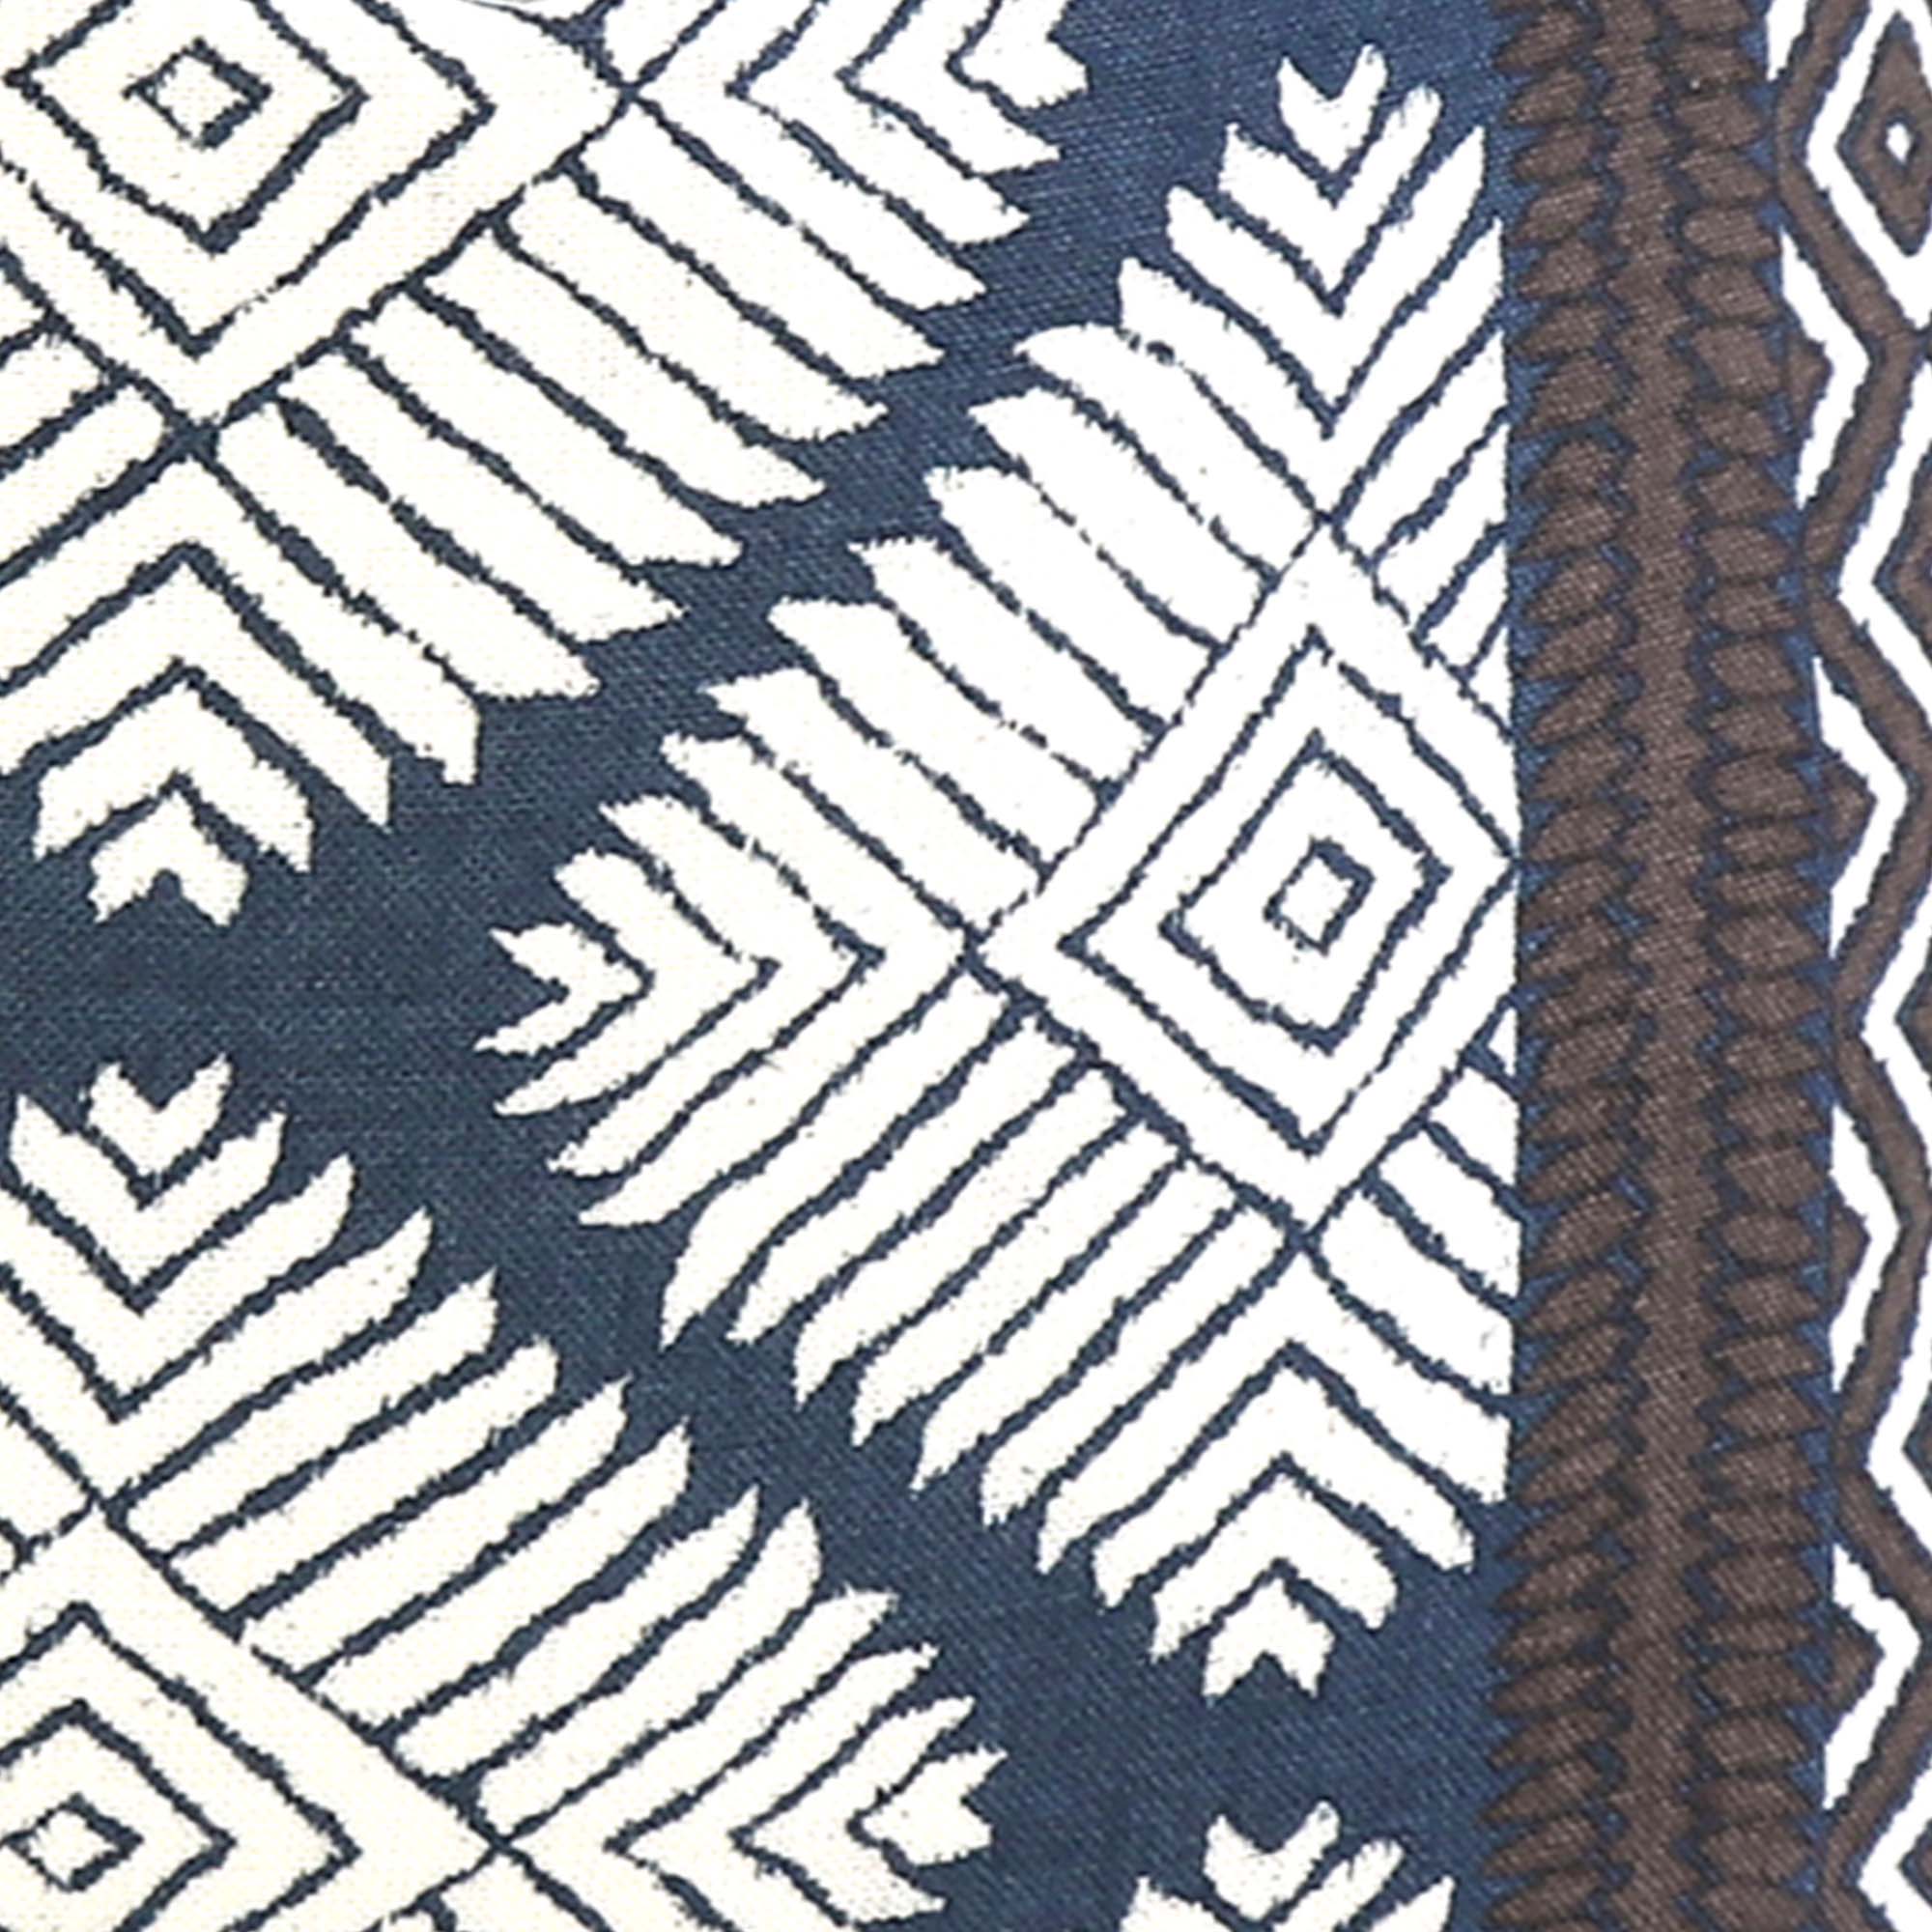 Austin Blue and Brown / 4x4 inch Fabric Swatch